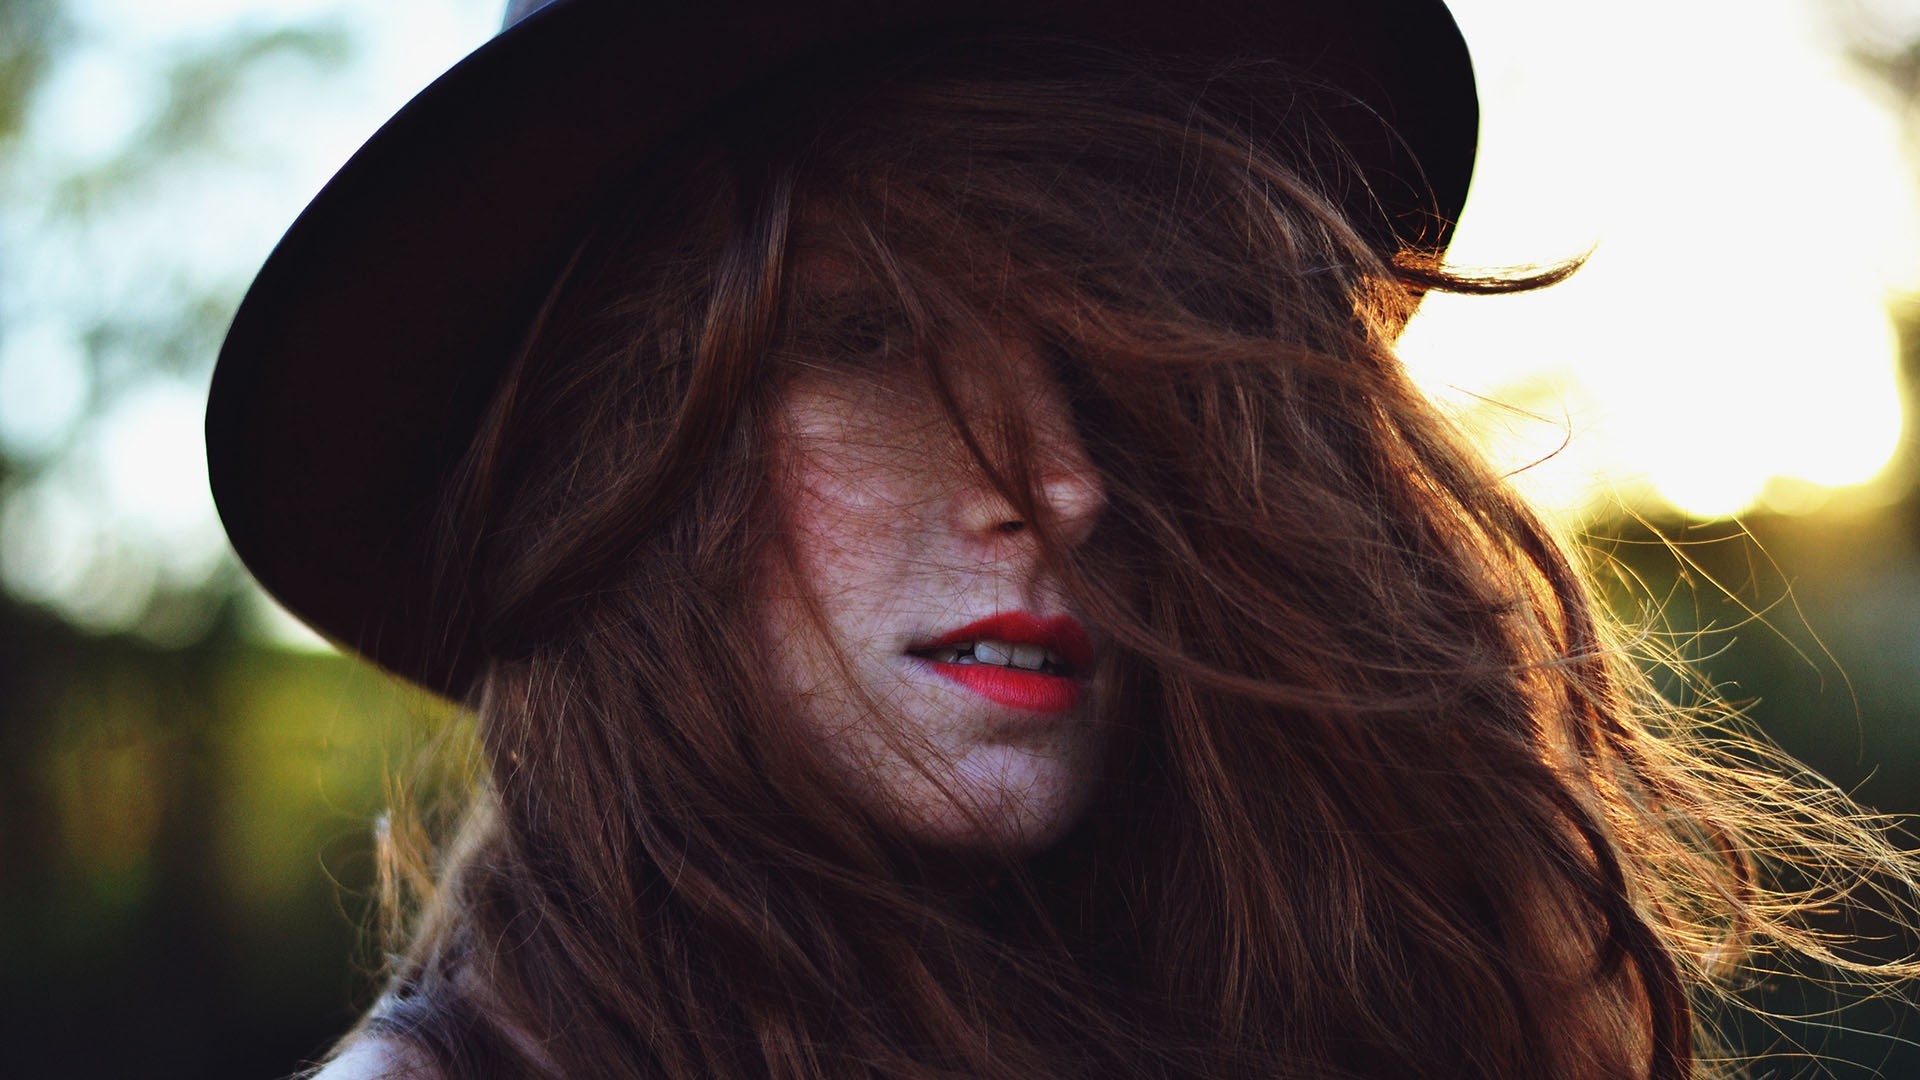 People 1920x1080 women brunette face freckles hair in face hat women with hats closeup hair   red lipstick model women outdoors outdoors long hair